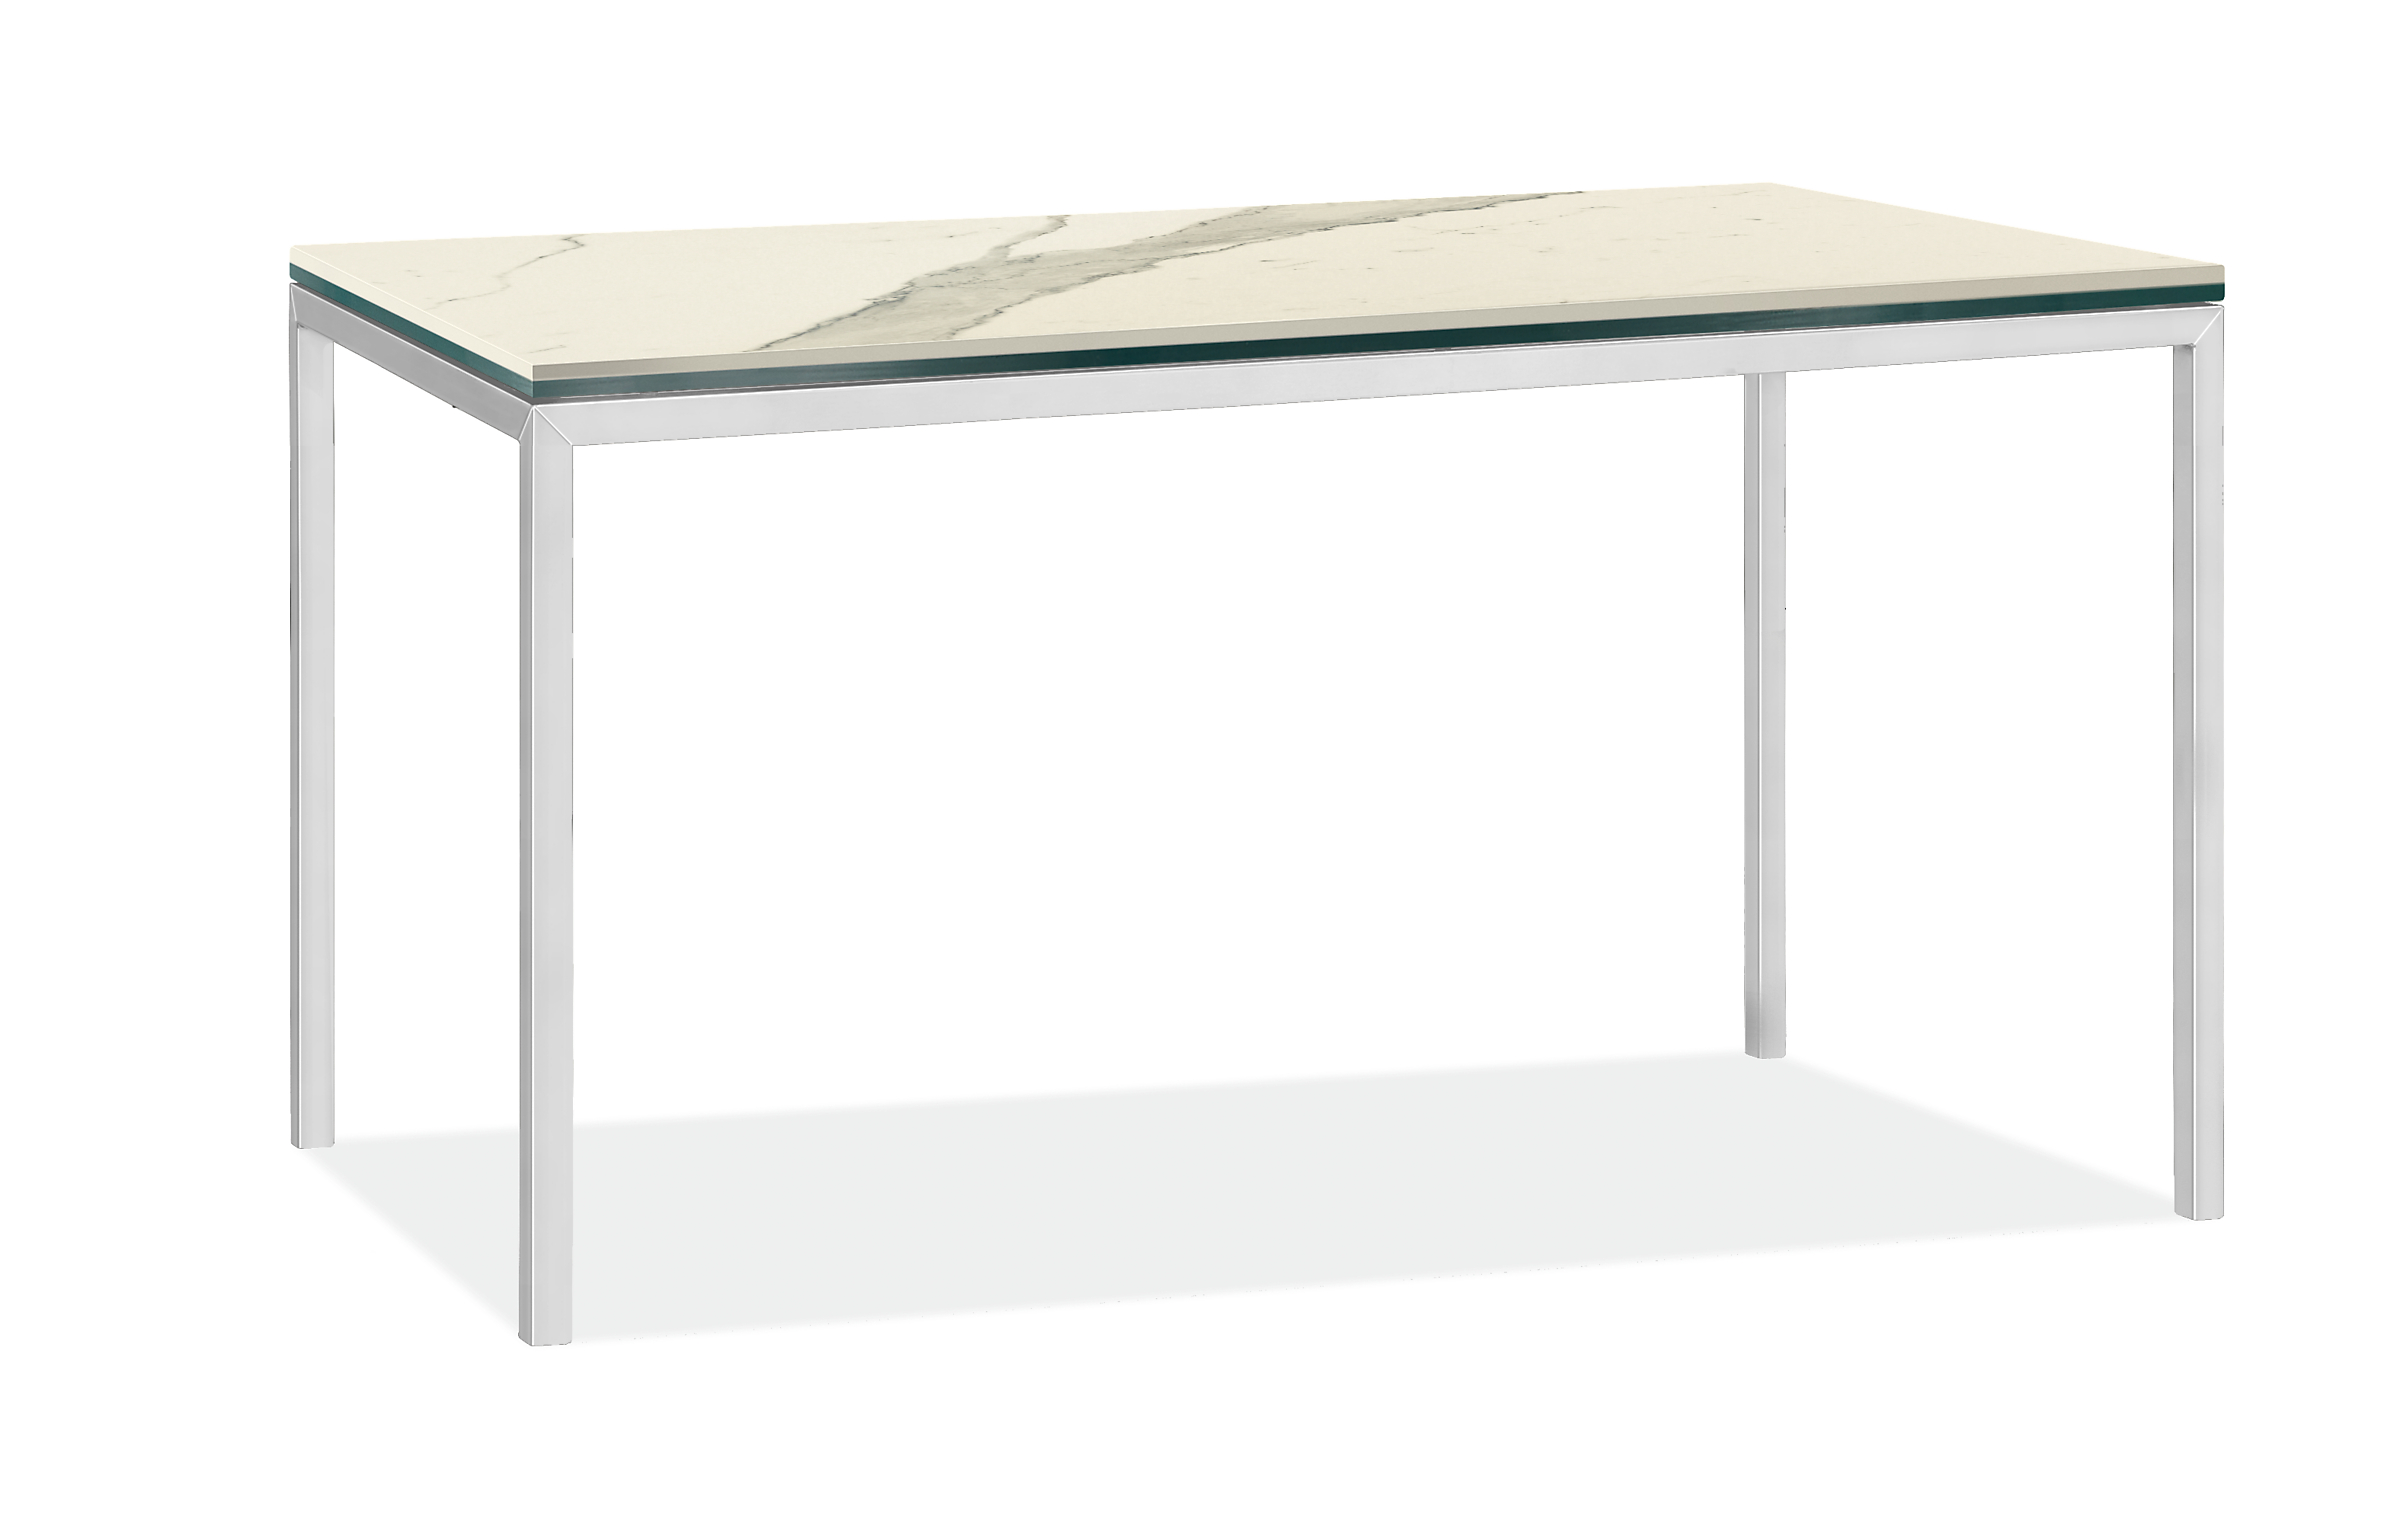 Parsons 48w 24d Table with 1" Leg